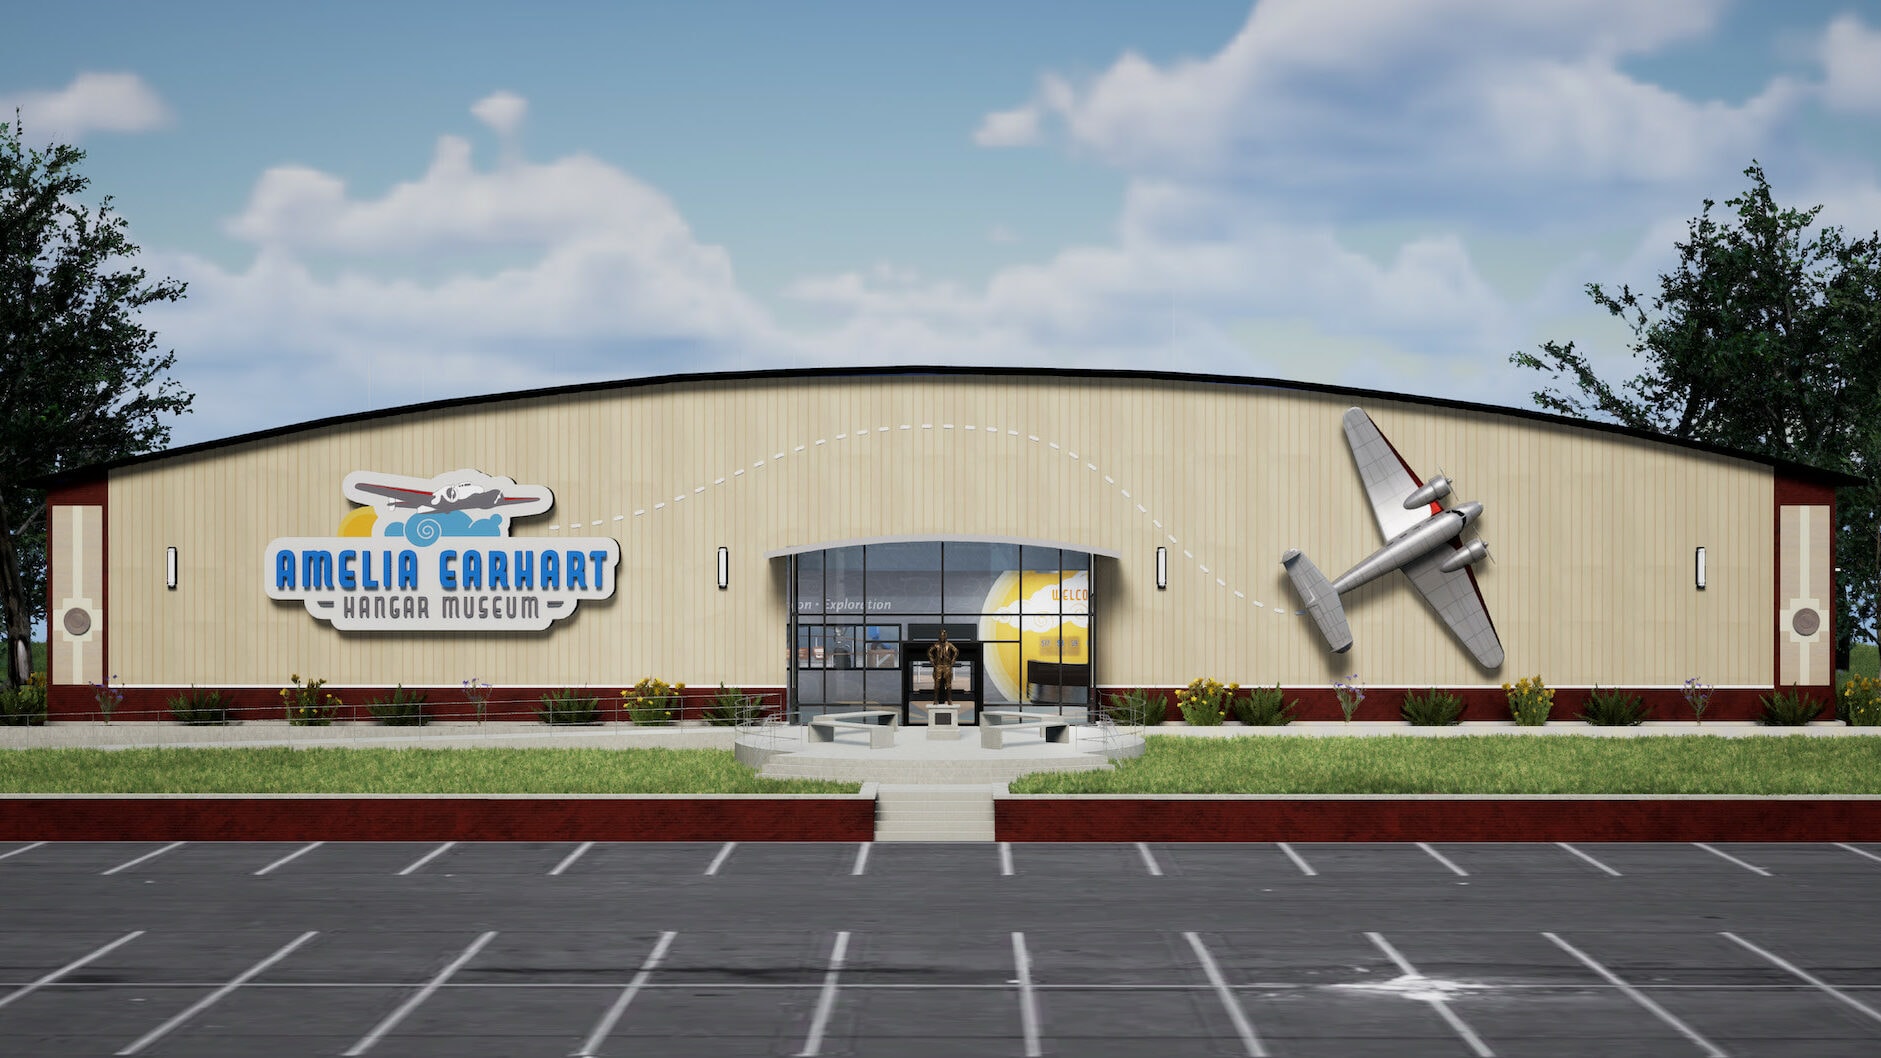 Rendering shows a warehouse-like building adorned with a plane and sign "Amelia Earhart Hangar Museum"